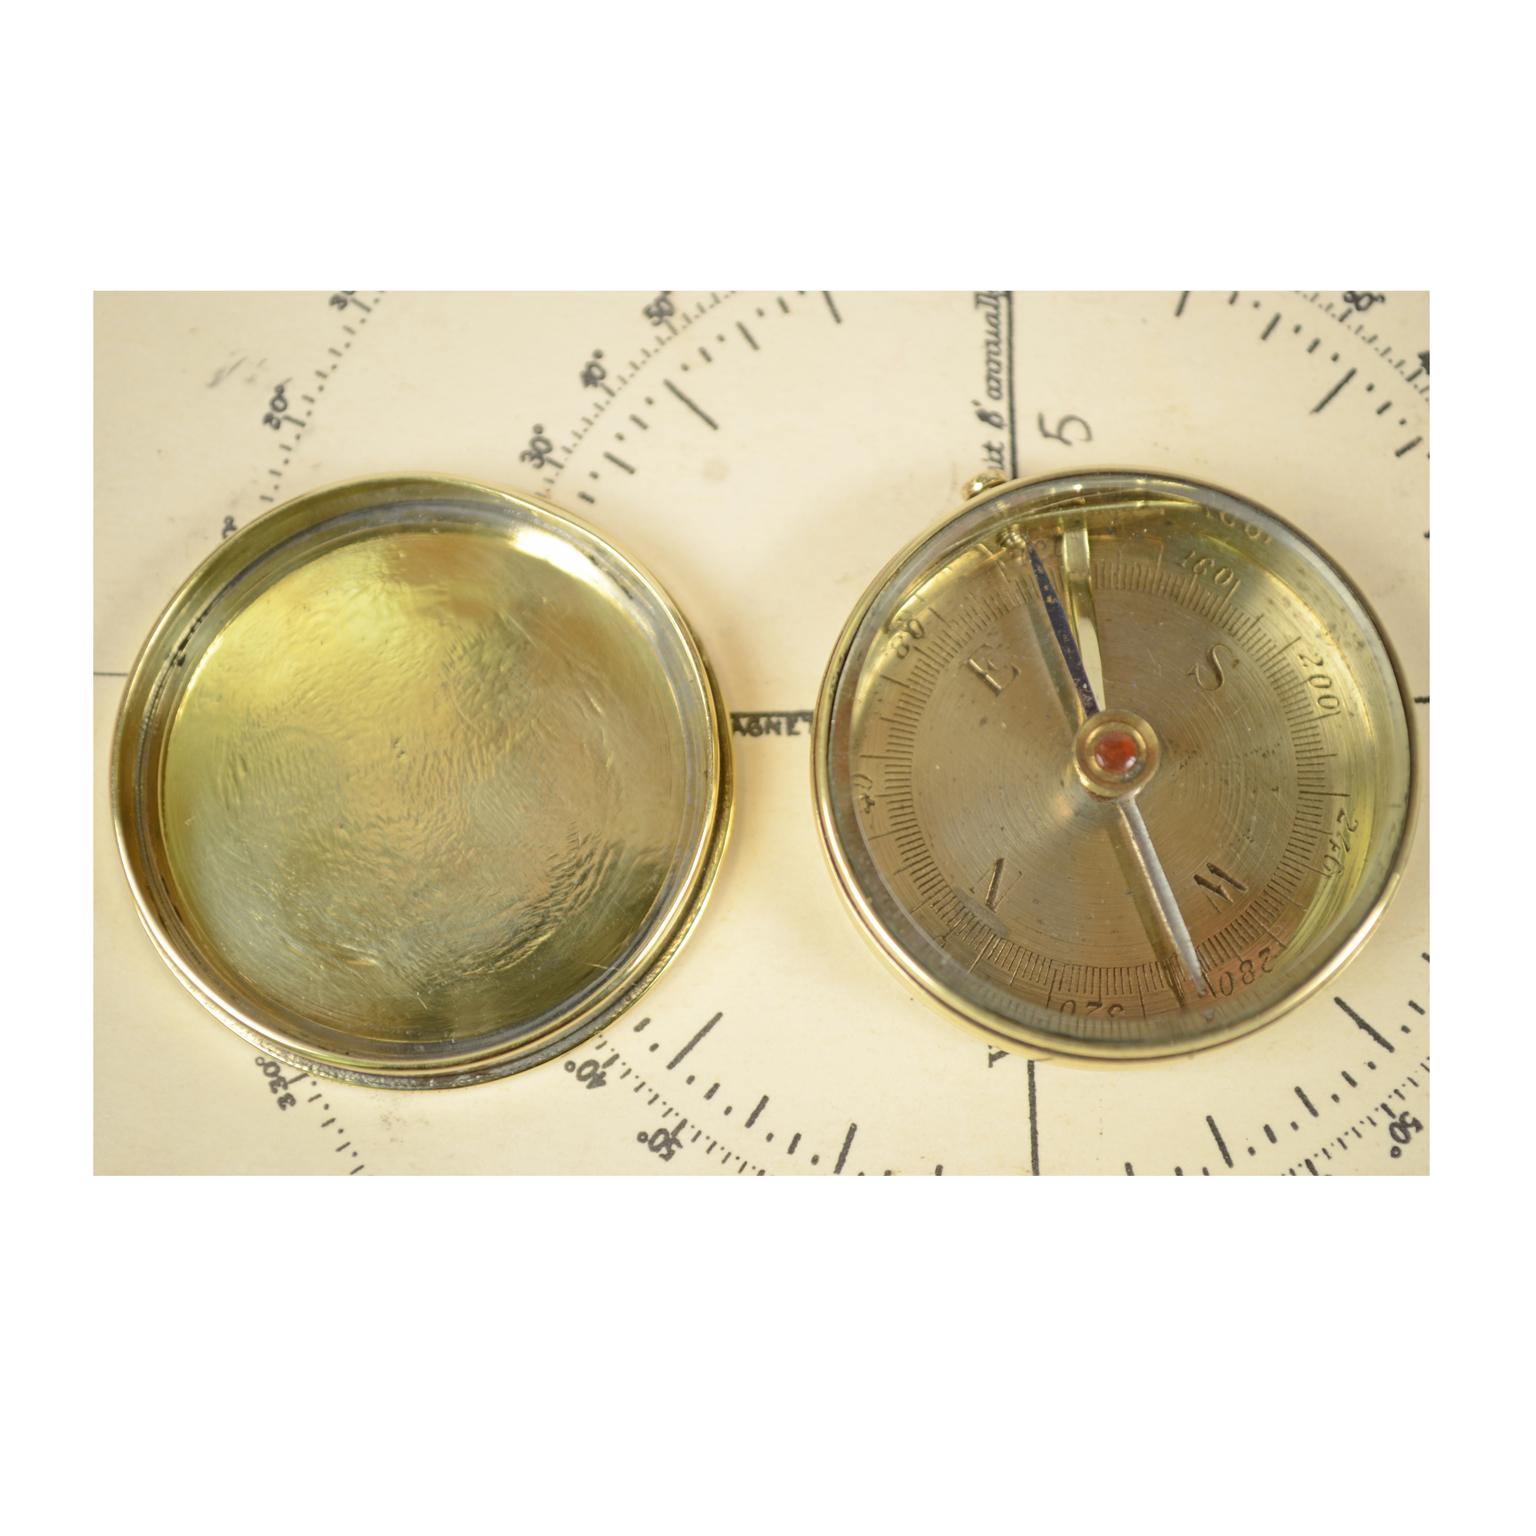 Small brass travel compass with lid, compass card with four winds and goniometric circle of engraved and chromed brass, complete with needle block to calculate the horizontal angles. French manufacture of the early 1900s, for the English market (on